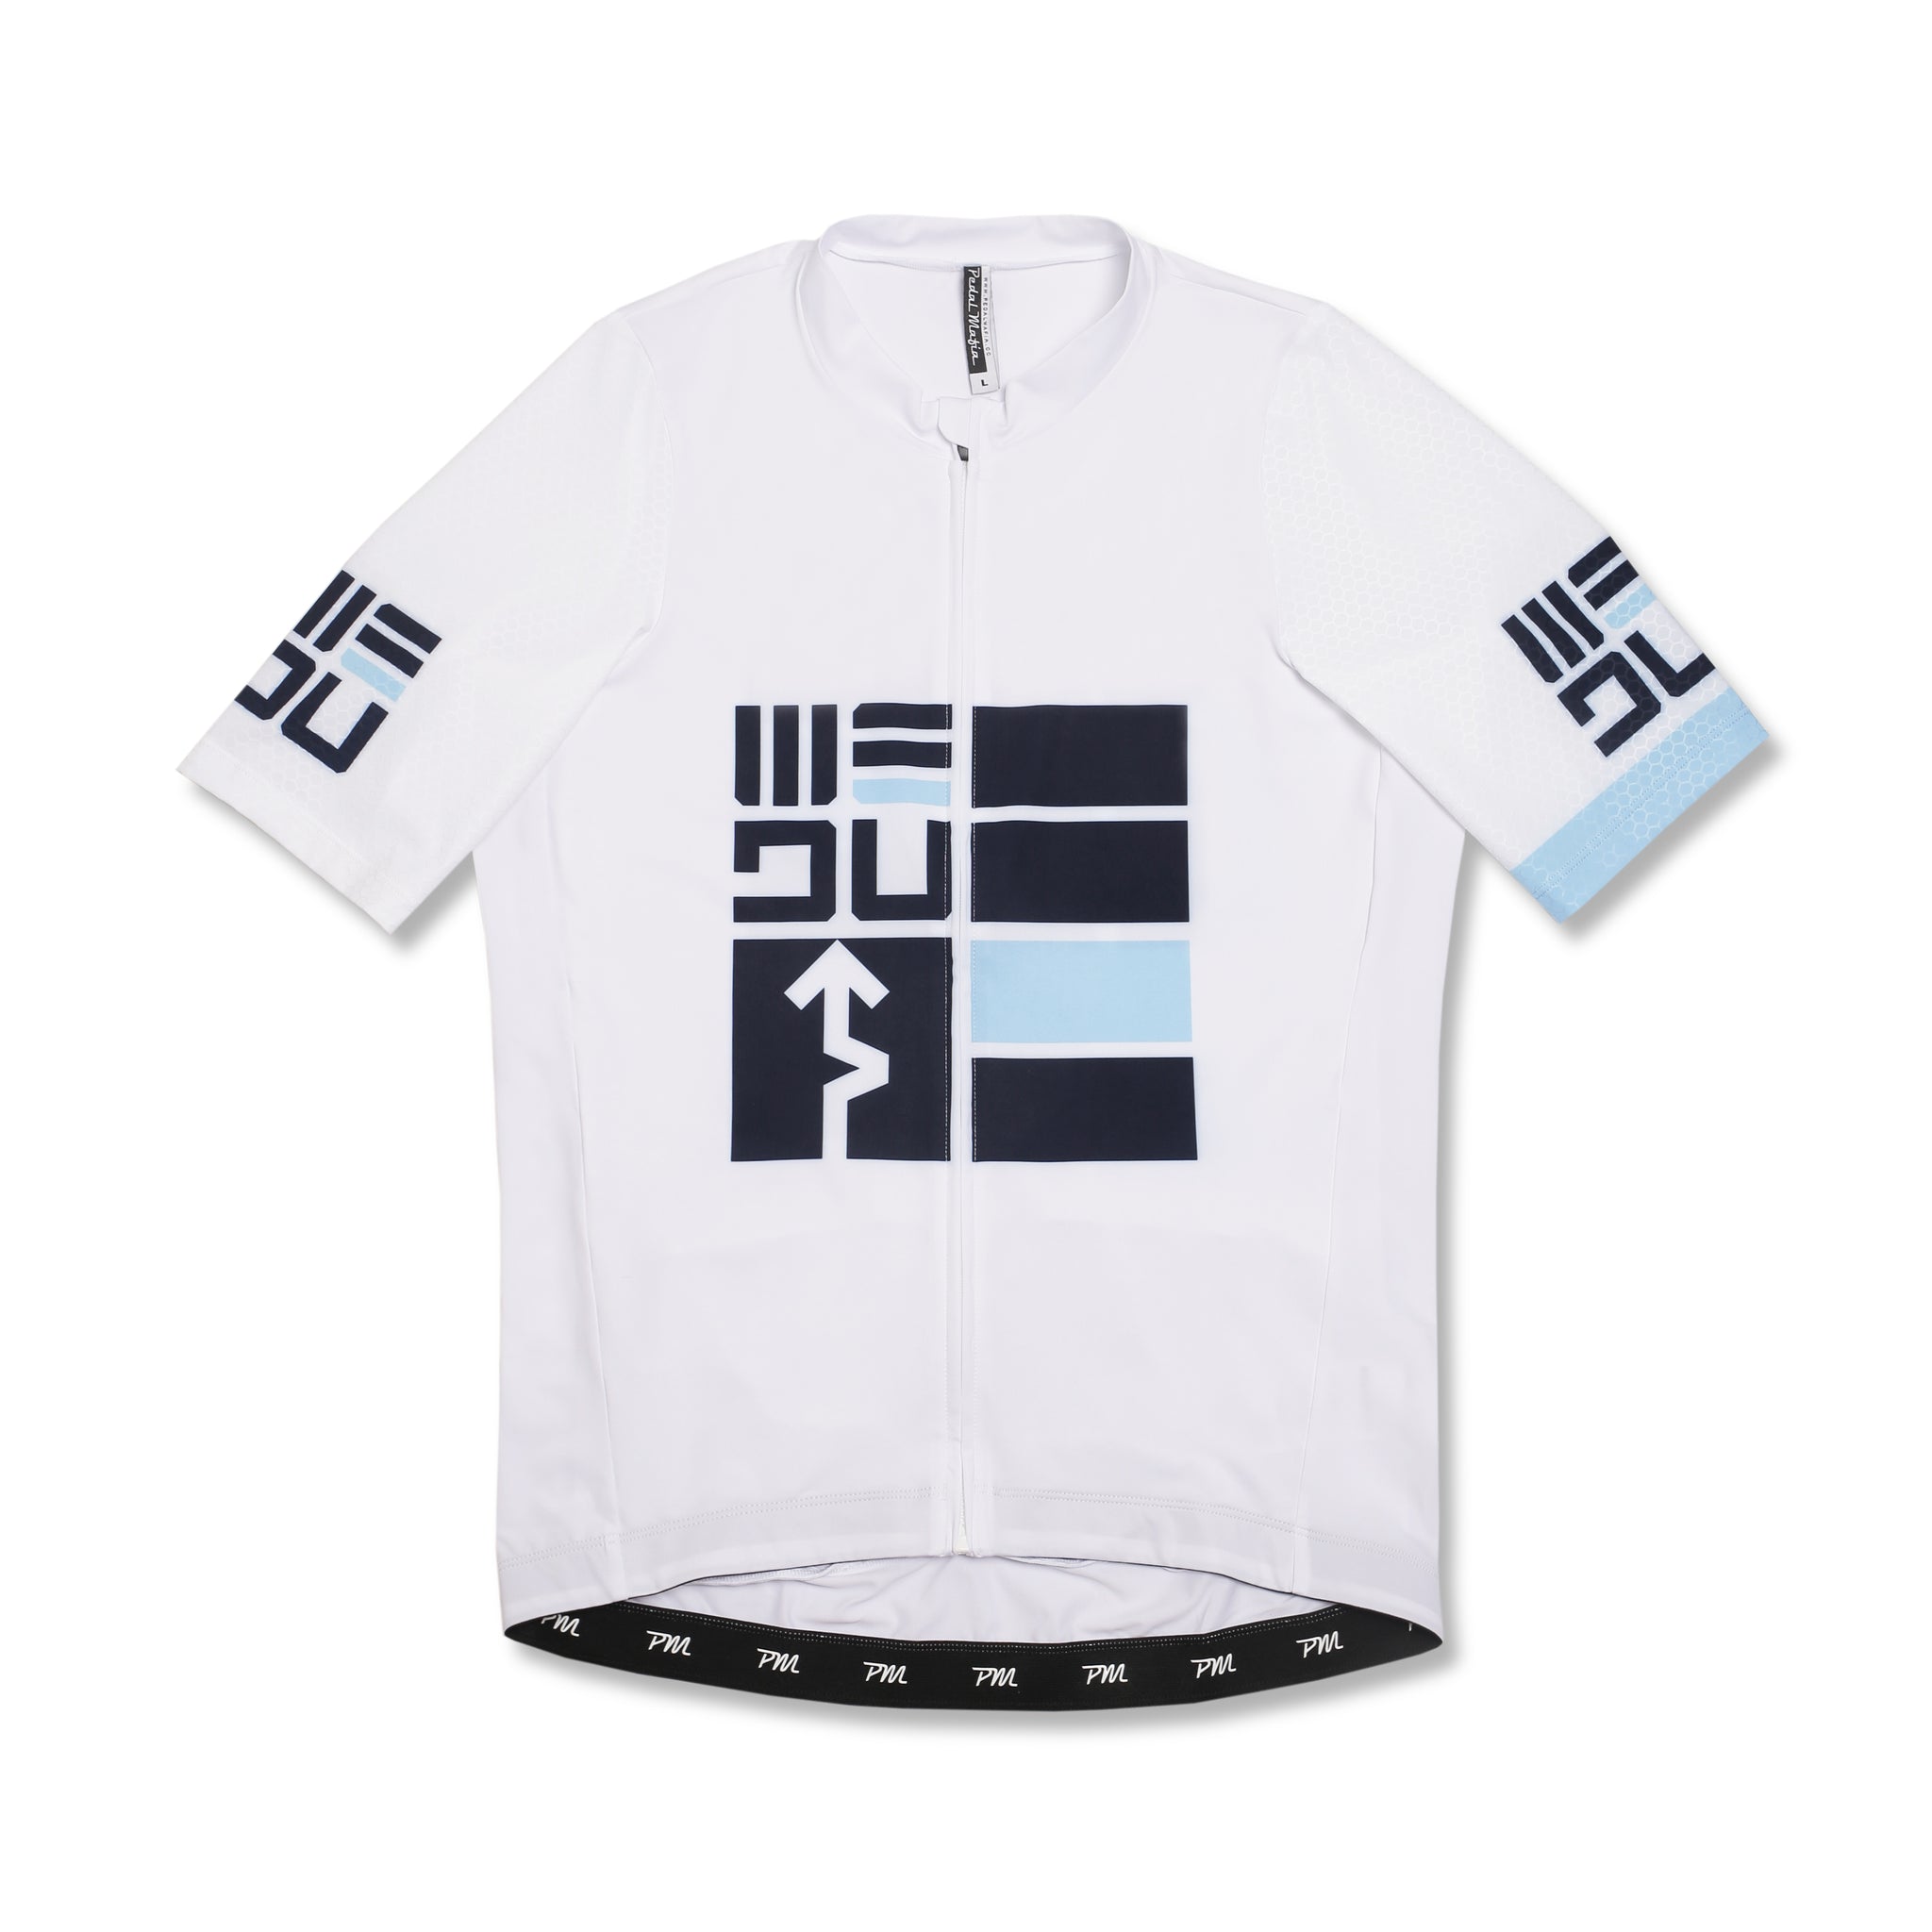 WEDŪ Pro White and Navy Jersey